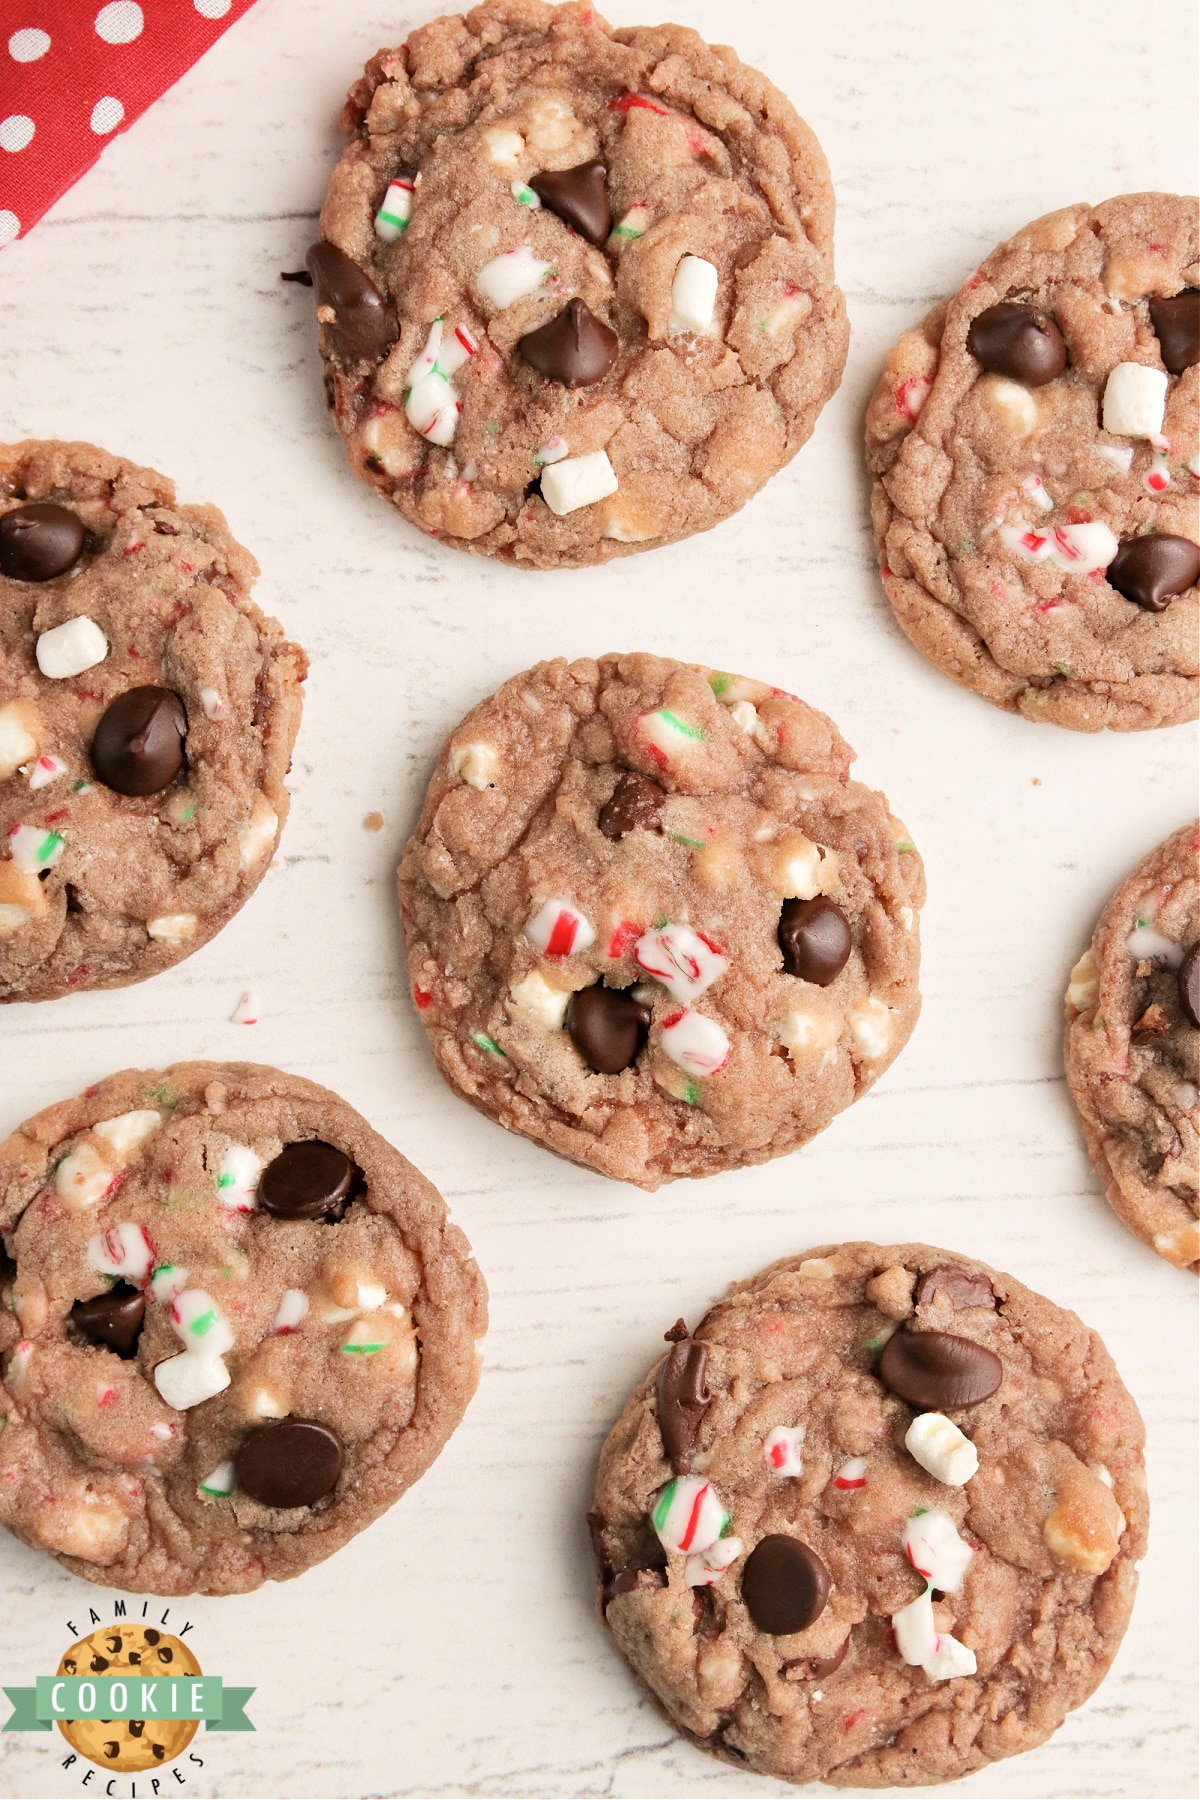 Hot chocolate cookie recipes